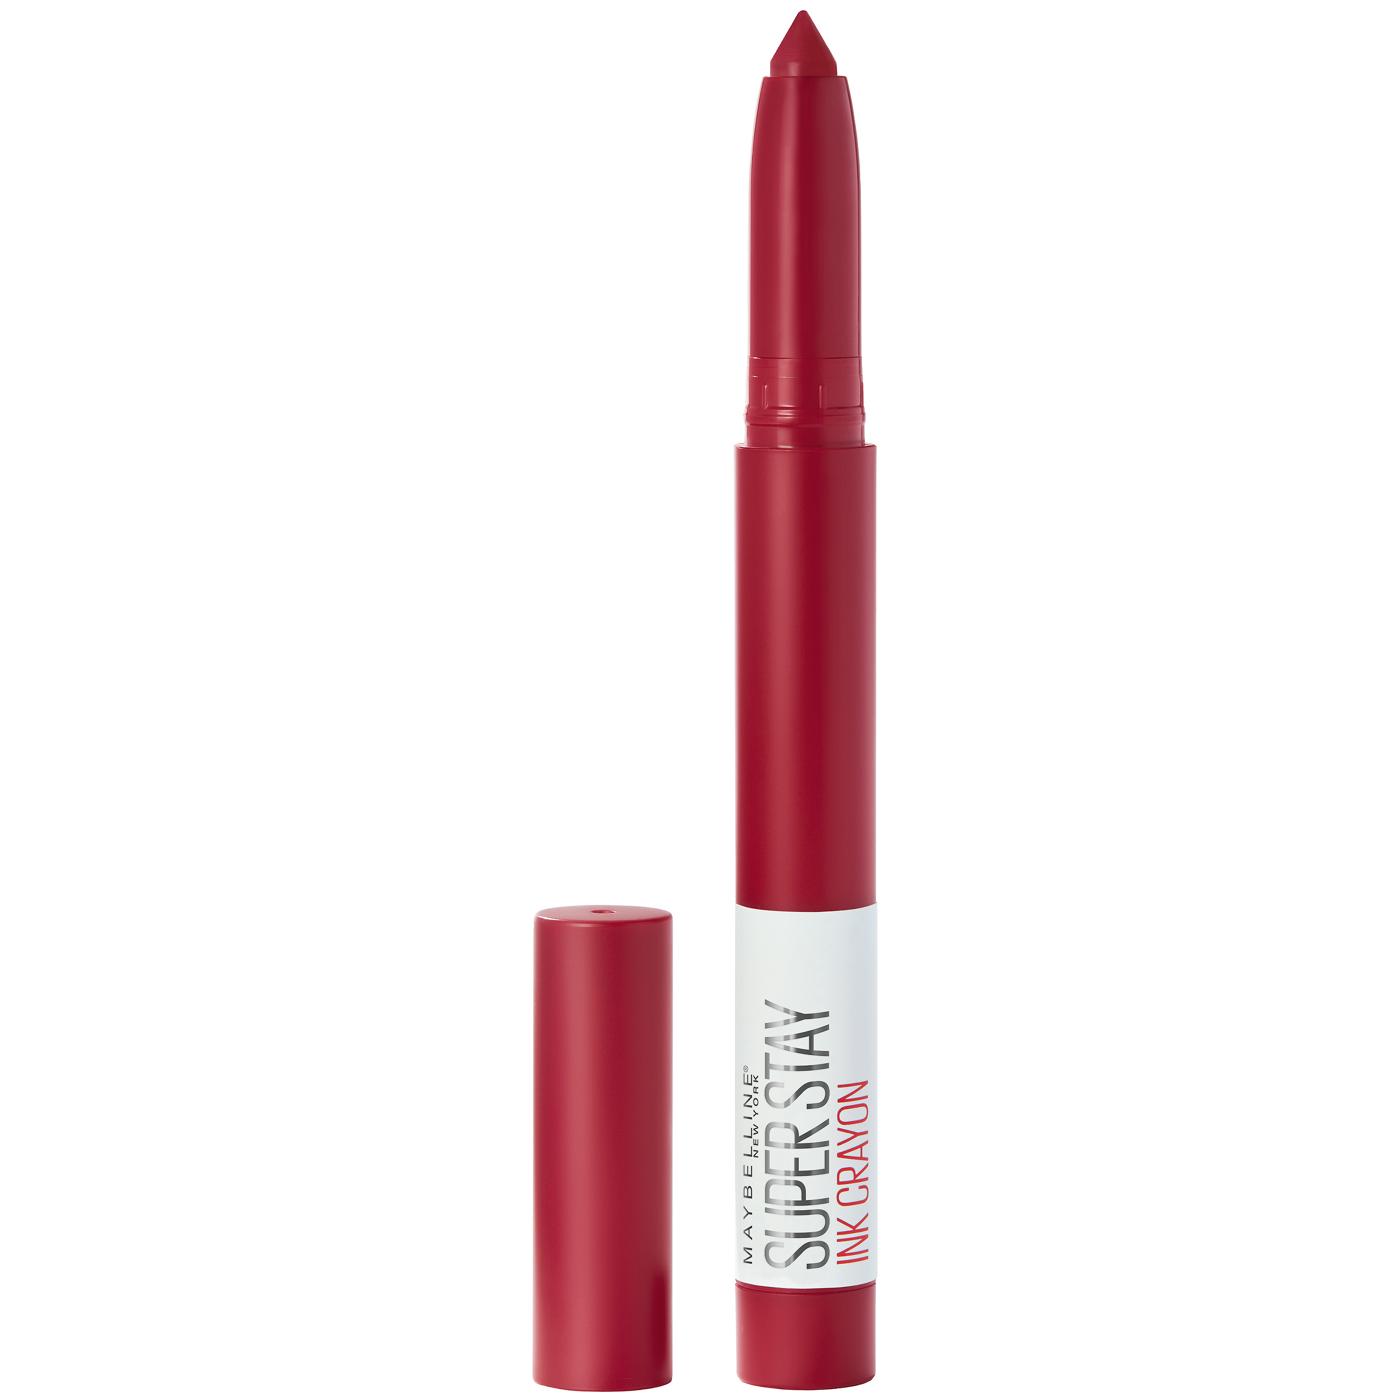 Maybelline Super Stay Ink Crayon Lipstick Your Empire; image 1 of 5